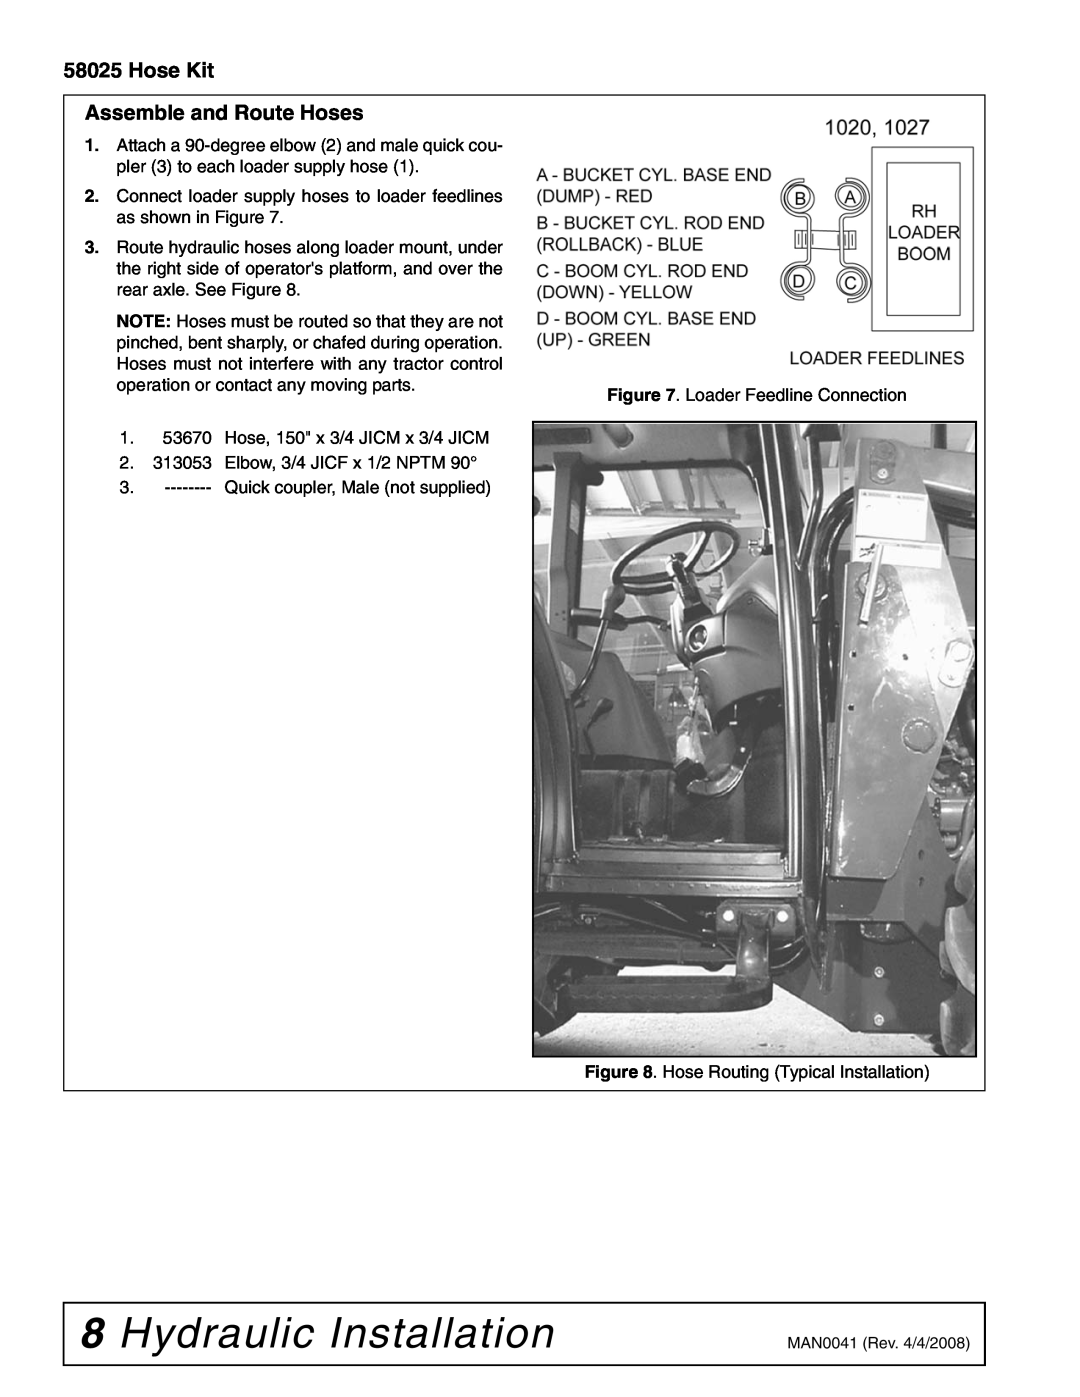 Woods Equipment LU126 installation manual Hydraulic Installation, Hose Kit Assemble and Route Hoses 